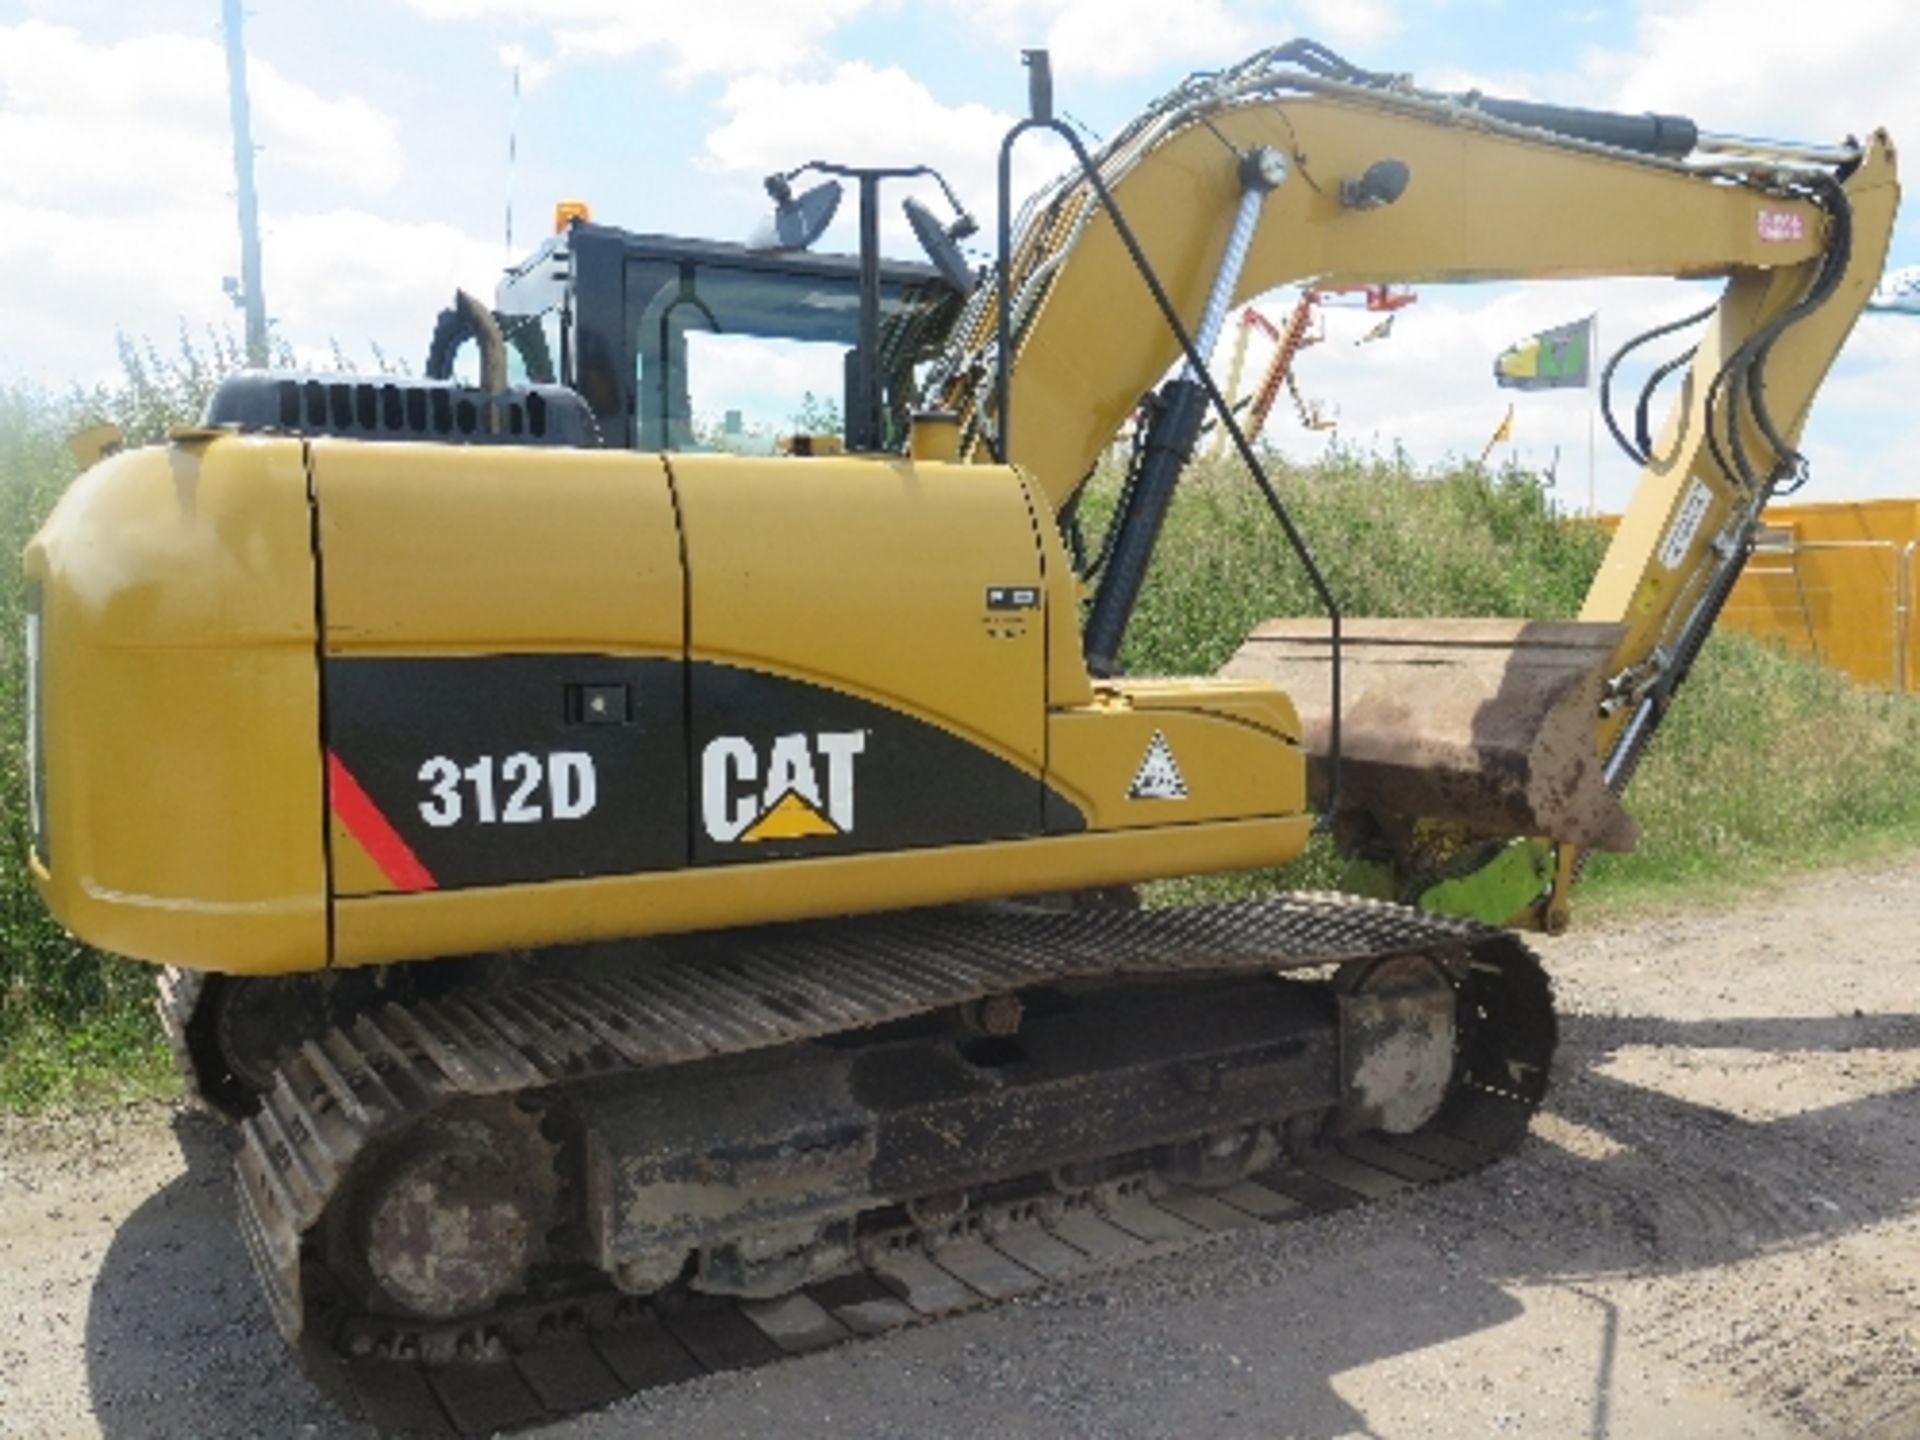 Caterpillar 312D excavator 3923 hrs 2010 PHH00254
This lot is included by kind permission of Hewden